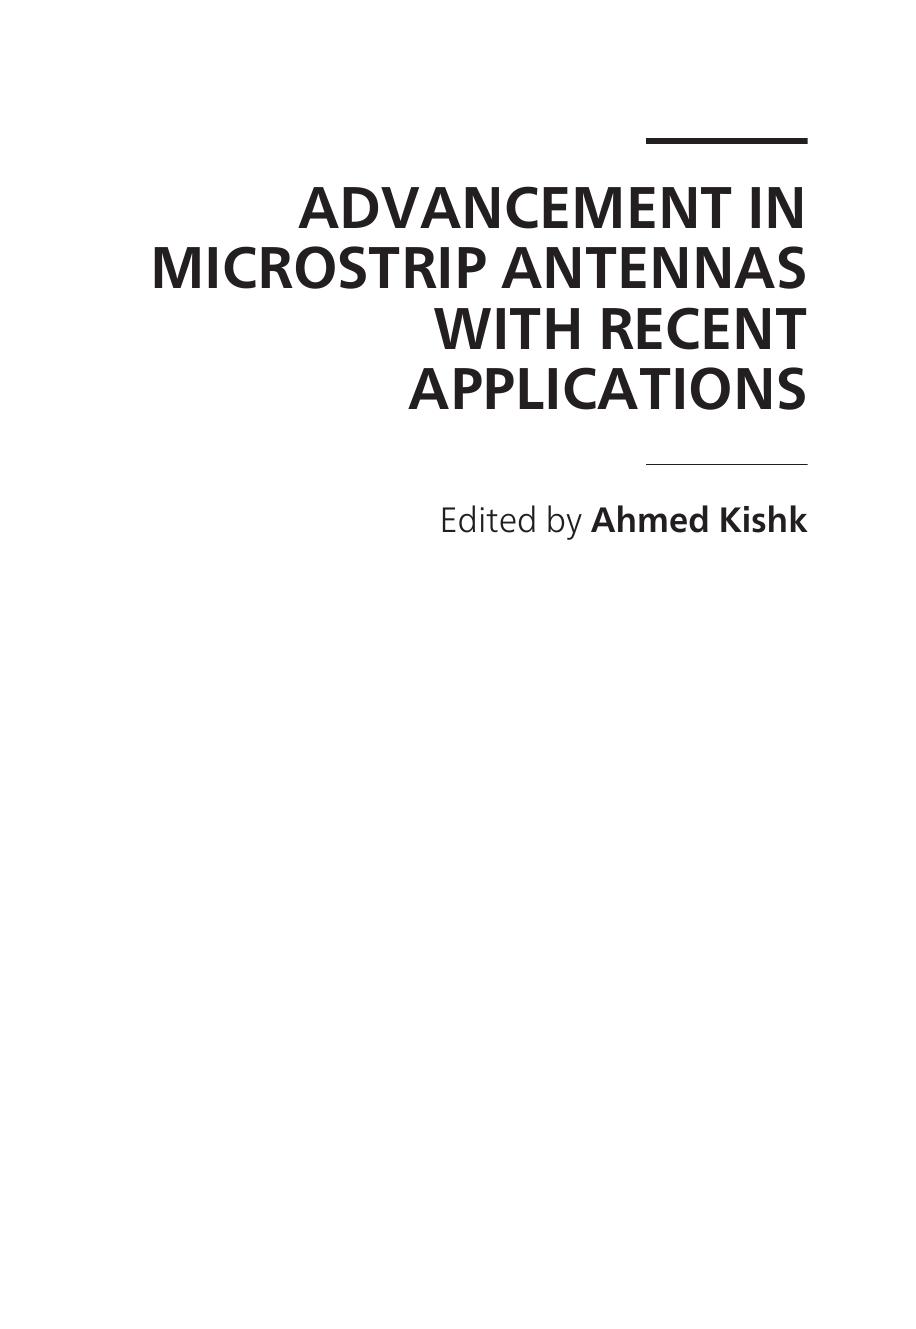 Advancement in Microstrip Antennas with Recent Applications 2013.pdf